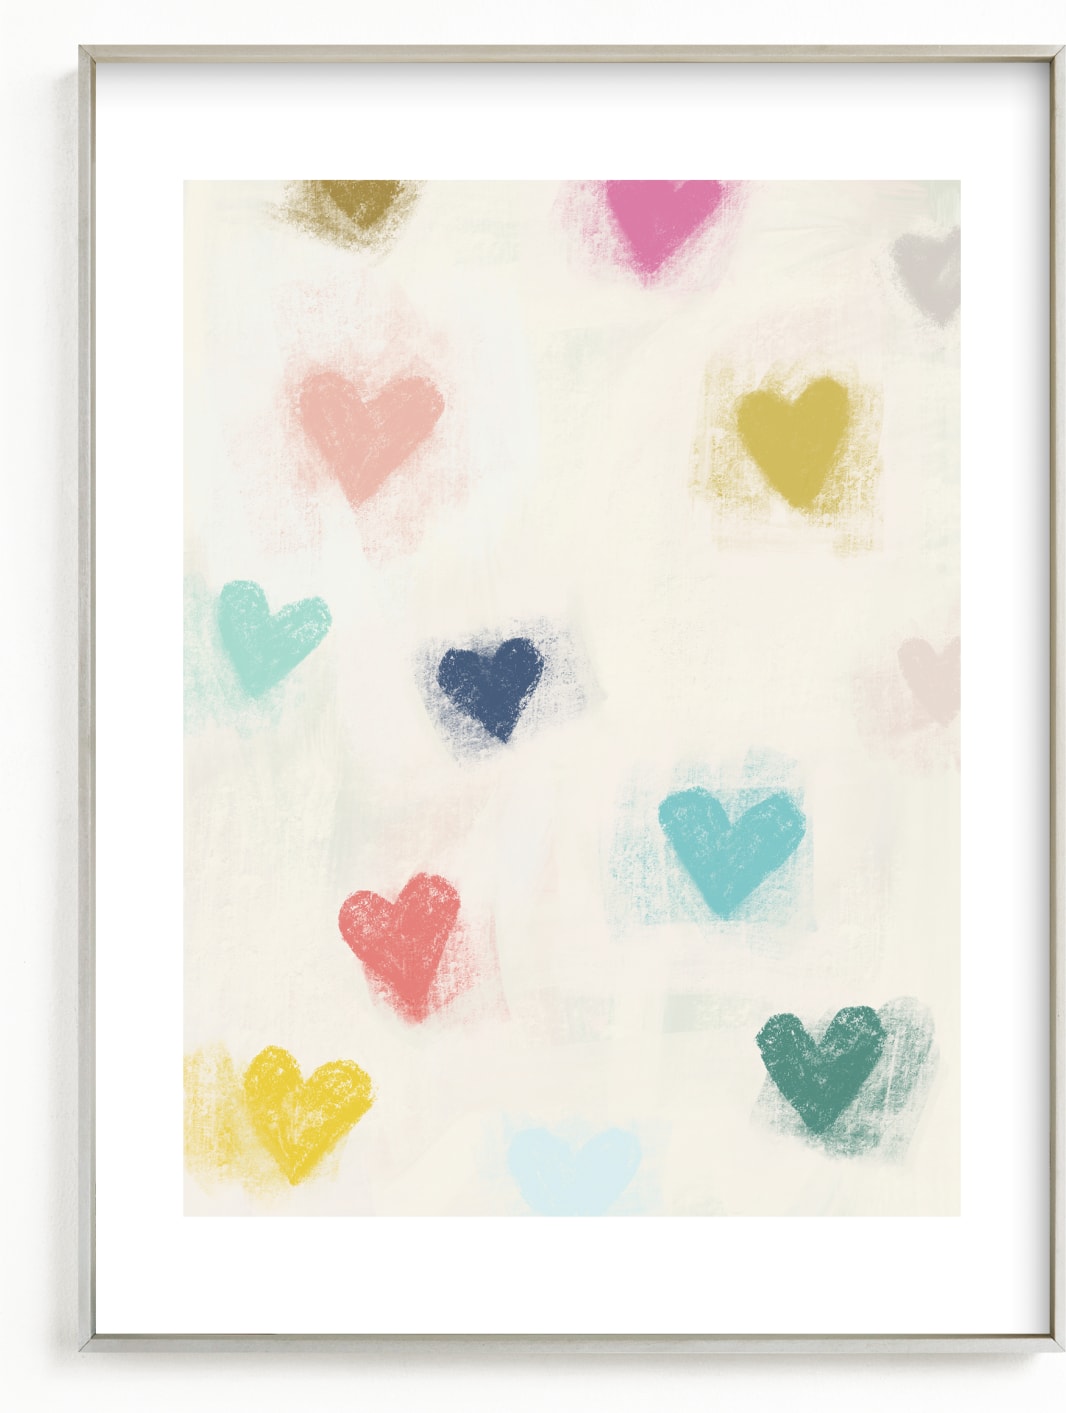 This is a ivory, colorful, pink art by Yaling Hou Suzuki called Our Hearts.